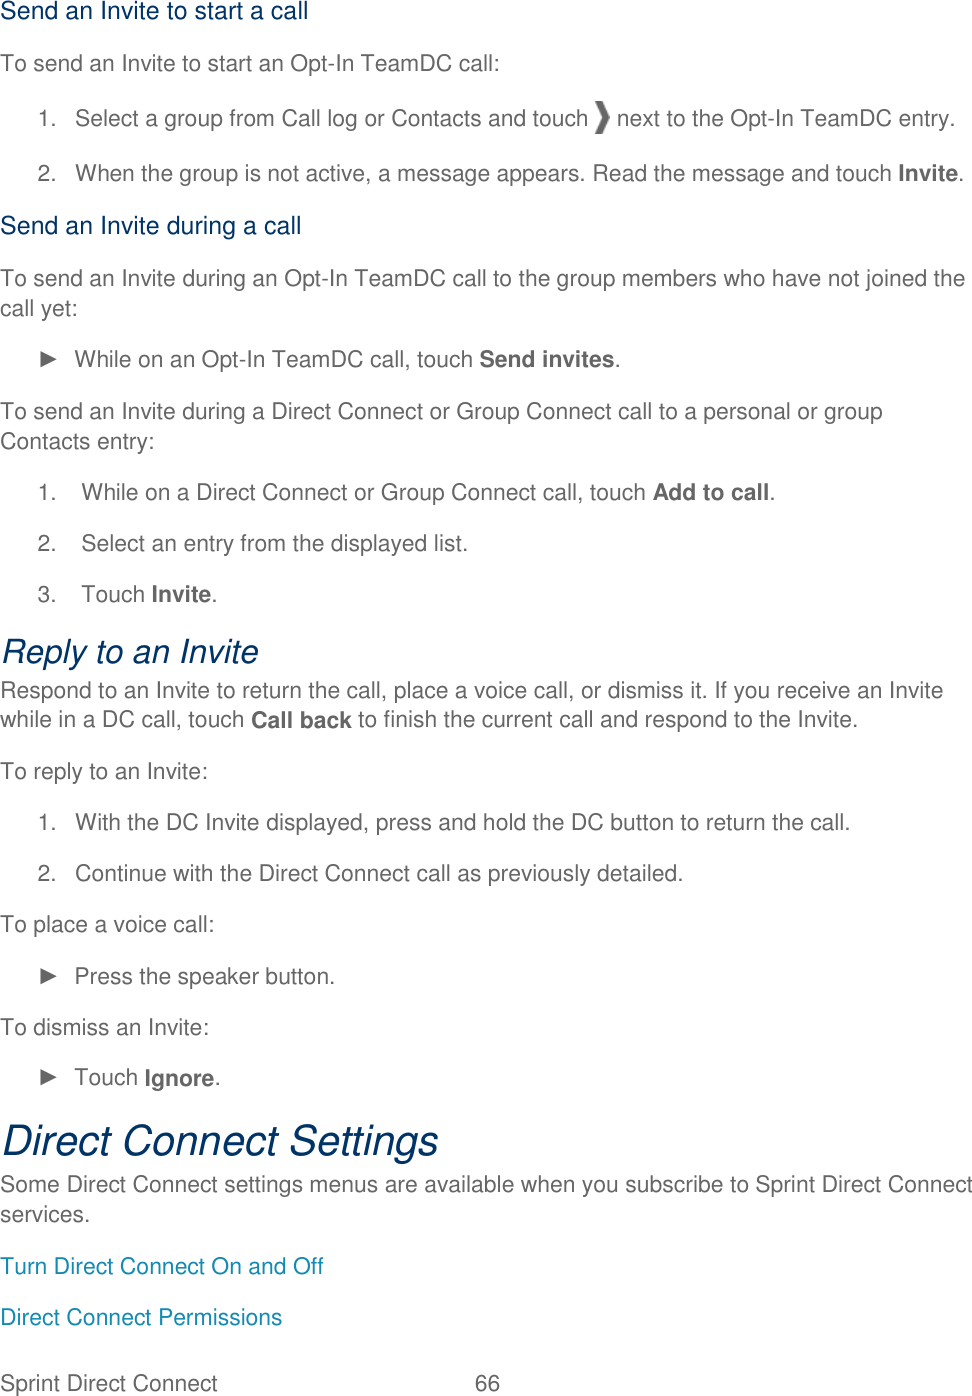 Sprint Direct Connect  66   Send an Invite to start a call To send an Invite to start an Opt-In TeamDC call: 1.  Select a group from Call log or Contacts and touch   next to the Opt-In TeamDC entry. 2.  When the group is not active, a message appears. Read the message and touch Invite. Send an Invite during a call To send an Invite during an Opt-In TeamDC call to the group members who have not joined the call yet: ►  While on an Opt-In TeamDC call, touch Send invites. To send an Invite during a Direct Connect or Group Connect call to a personal or group Contacts entry: 1.  While on a Direct Connect or Group Connect call, touch Add to call. 2.  Select an entry from the displayed list. 3.  Touch Invite. Reply to an Invite Respond to an Invite to return the call, place a voice call, or dismiss it. If you receive an Invite while in a DC call, touch Call back to finish the current call and respond to the Invite. To reply to an Invite: 1.  With the DC Invite displayed, press and hold the DC button to return the call. 2.  Continue with the Direct Connect call as previously detailed. To place a voice call: ►  Press the speaker button. To dismiss an Invite: ►  Touch Ignore. Direct Connect Settings Some Direct Connect settings menus are available when you subscribe to Sprint Direct Connect services. Turn Direct Connect On and Off Direct Connect Permissions 